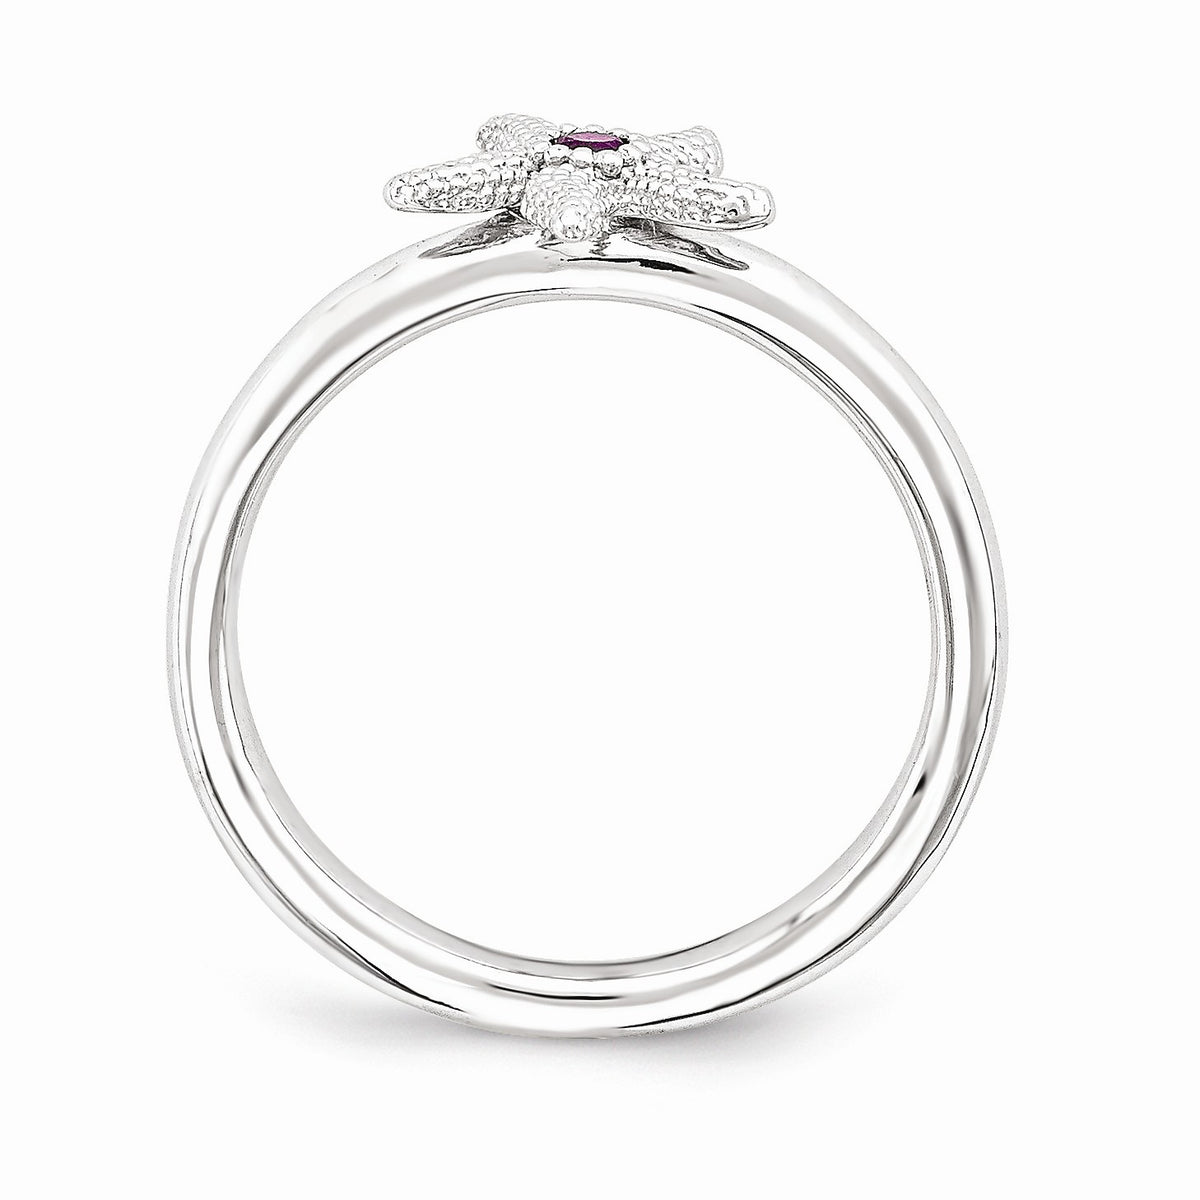 Alternate view of the Sterling Silver Stackable Expressions Amethyst 10mm Starfish Ring by The Black Bow Jewelry Co.